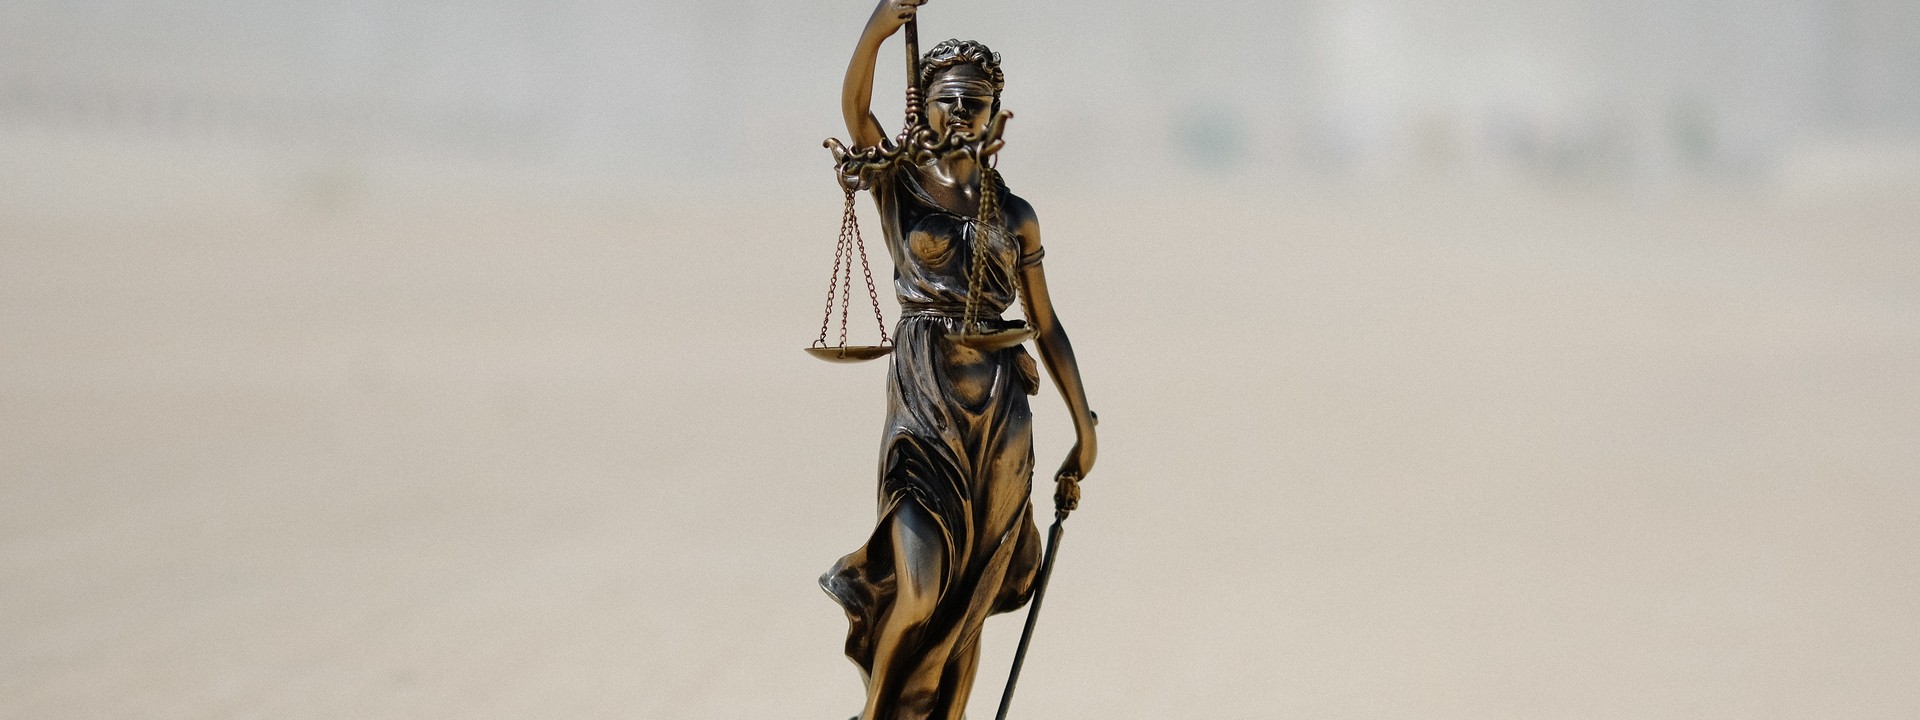 a_statue_of_a_lady_justice_holding_a_scale - ©wesleyphotography